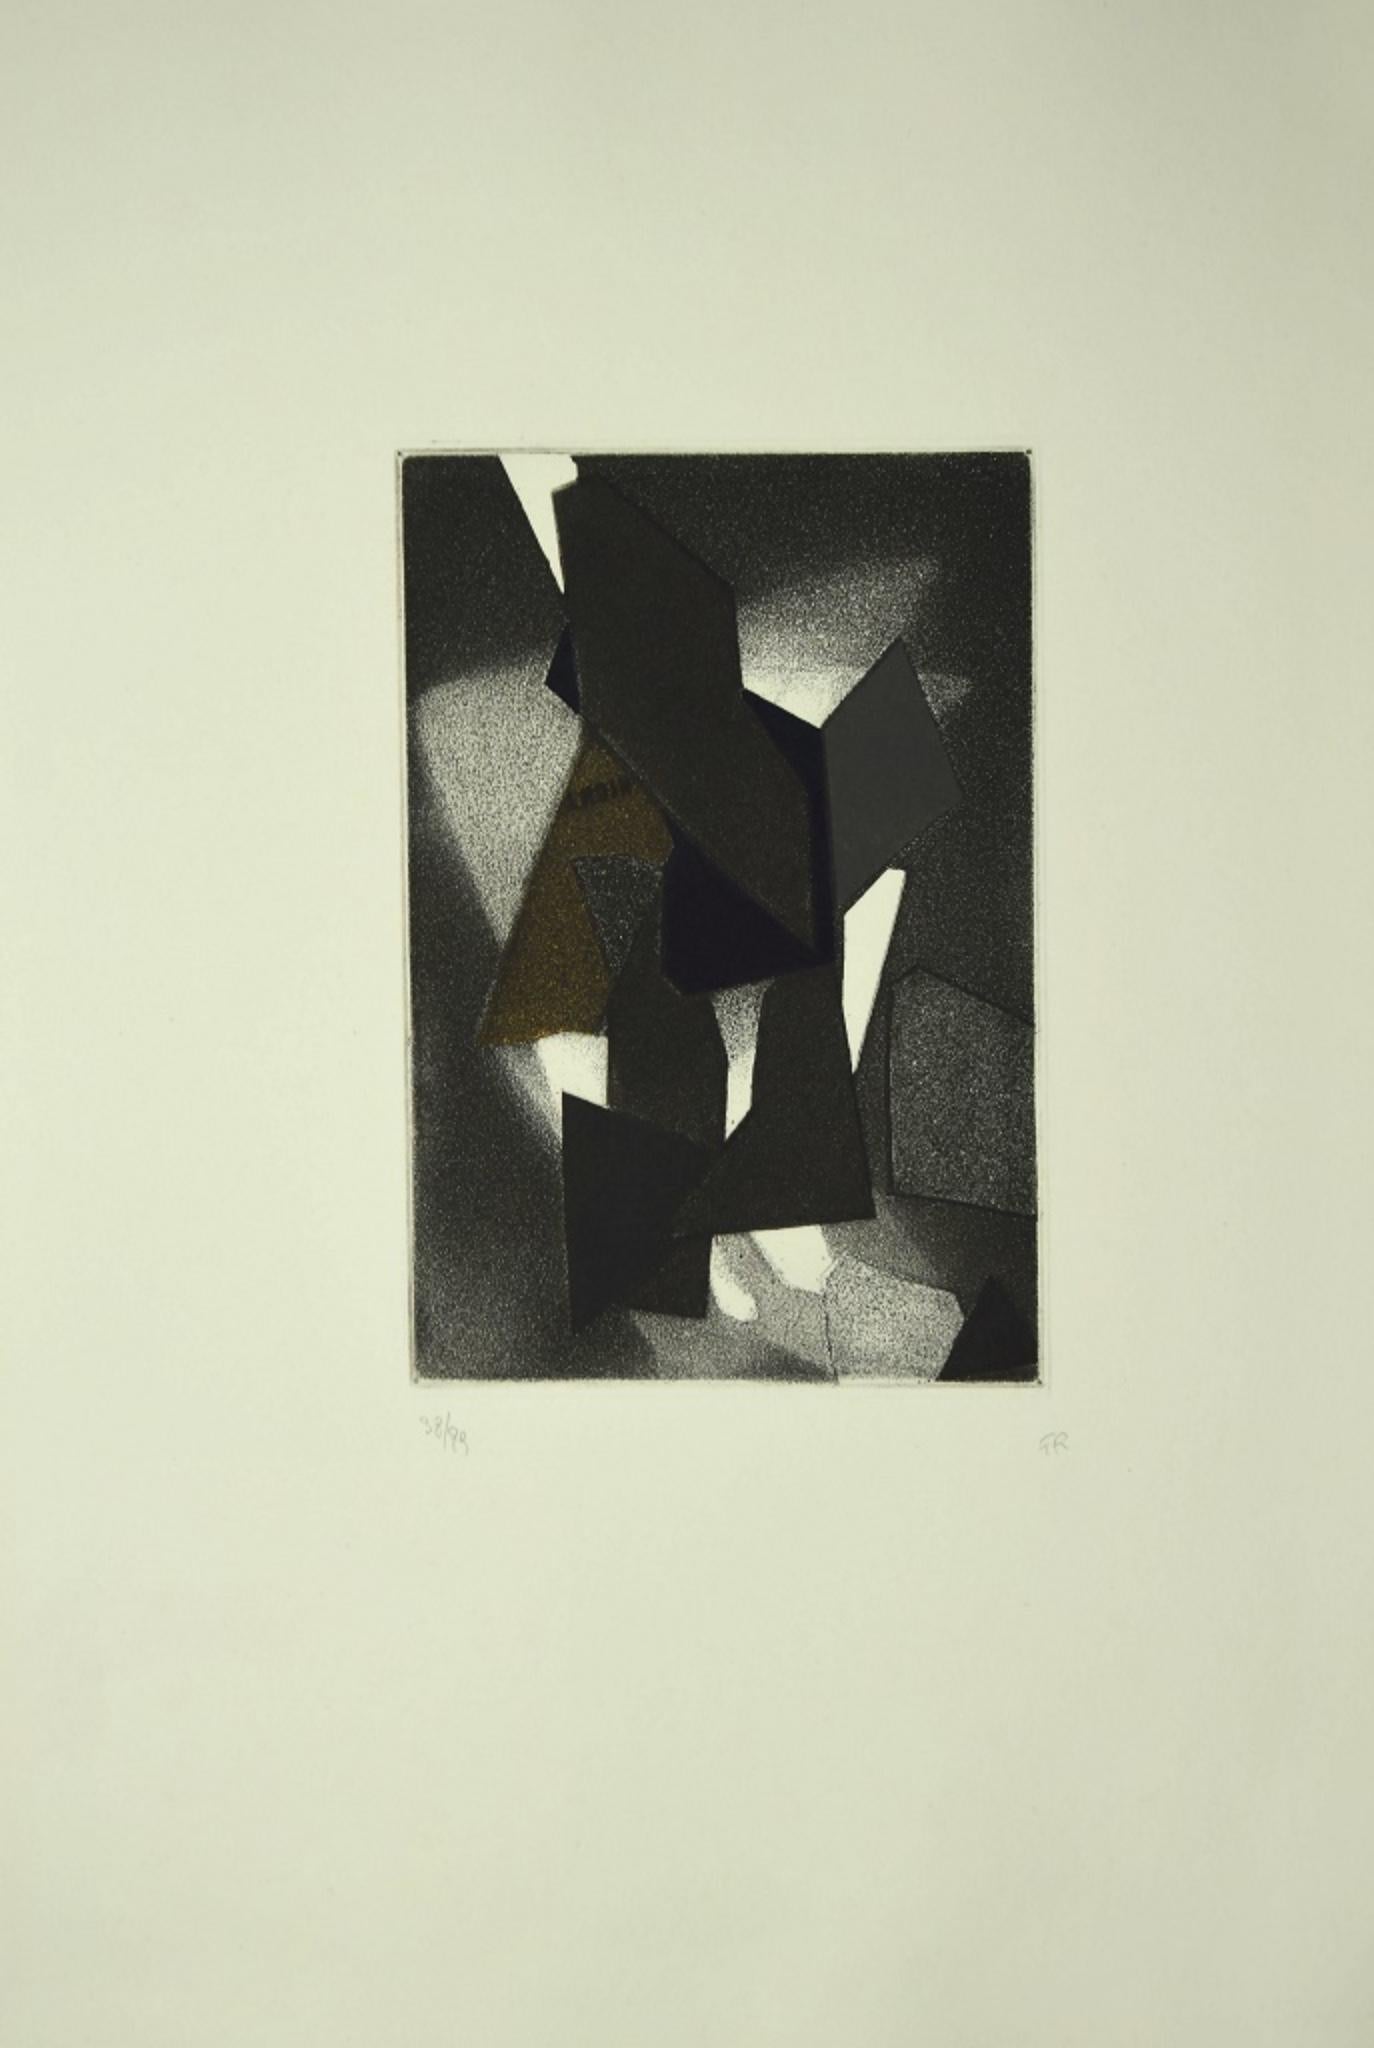 Etching is an original composition realized by Hans Richter.

There are 4 copies in good conditions, no signature.  

Image Dimensions: 21.5x14.5 cm.

On the back of one copy there is a label of publisher with certificate of authenticity.

Hans